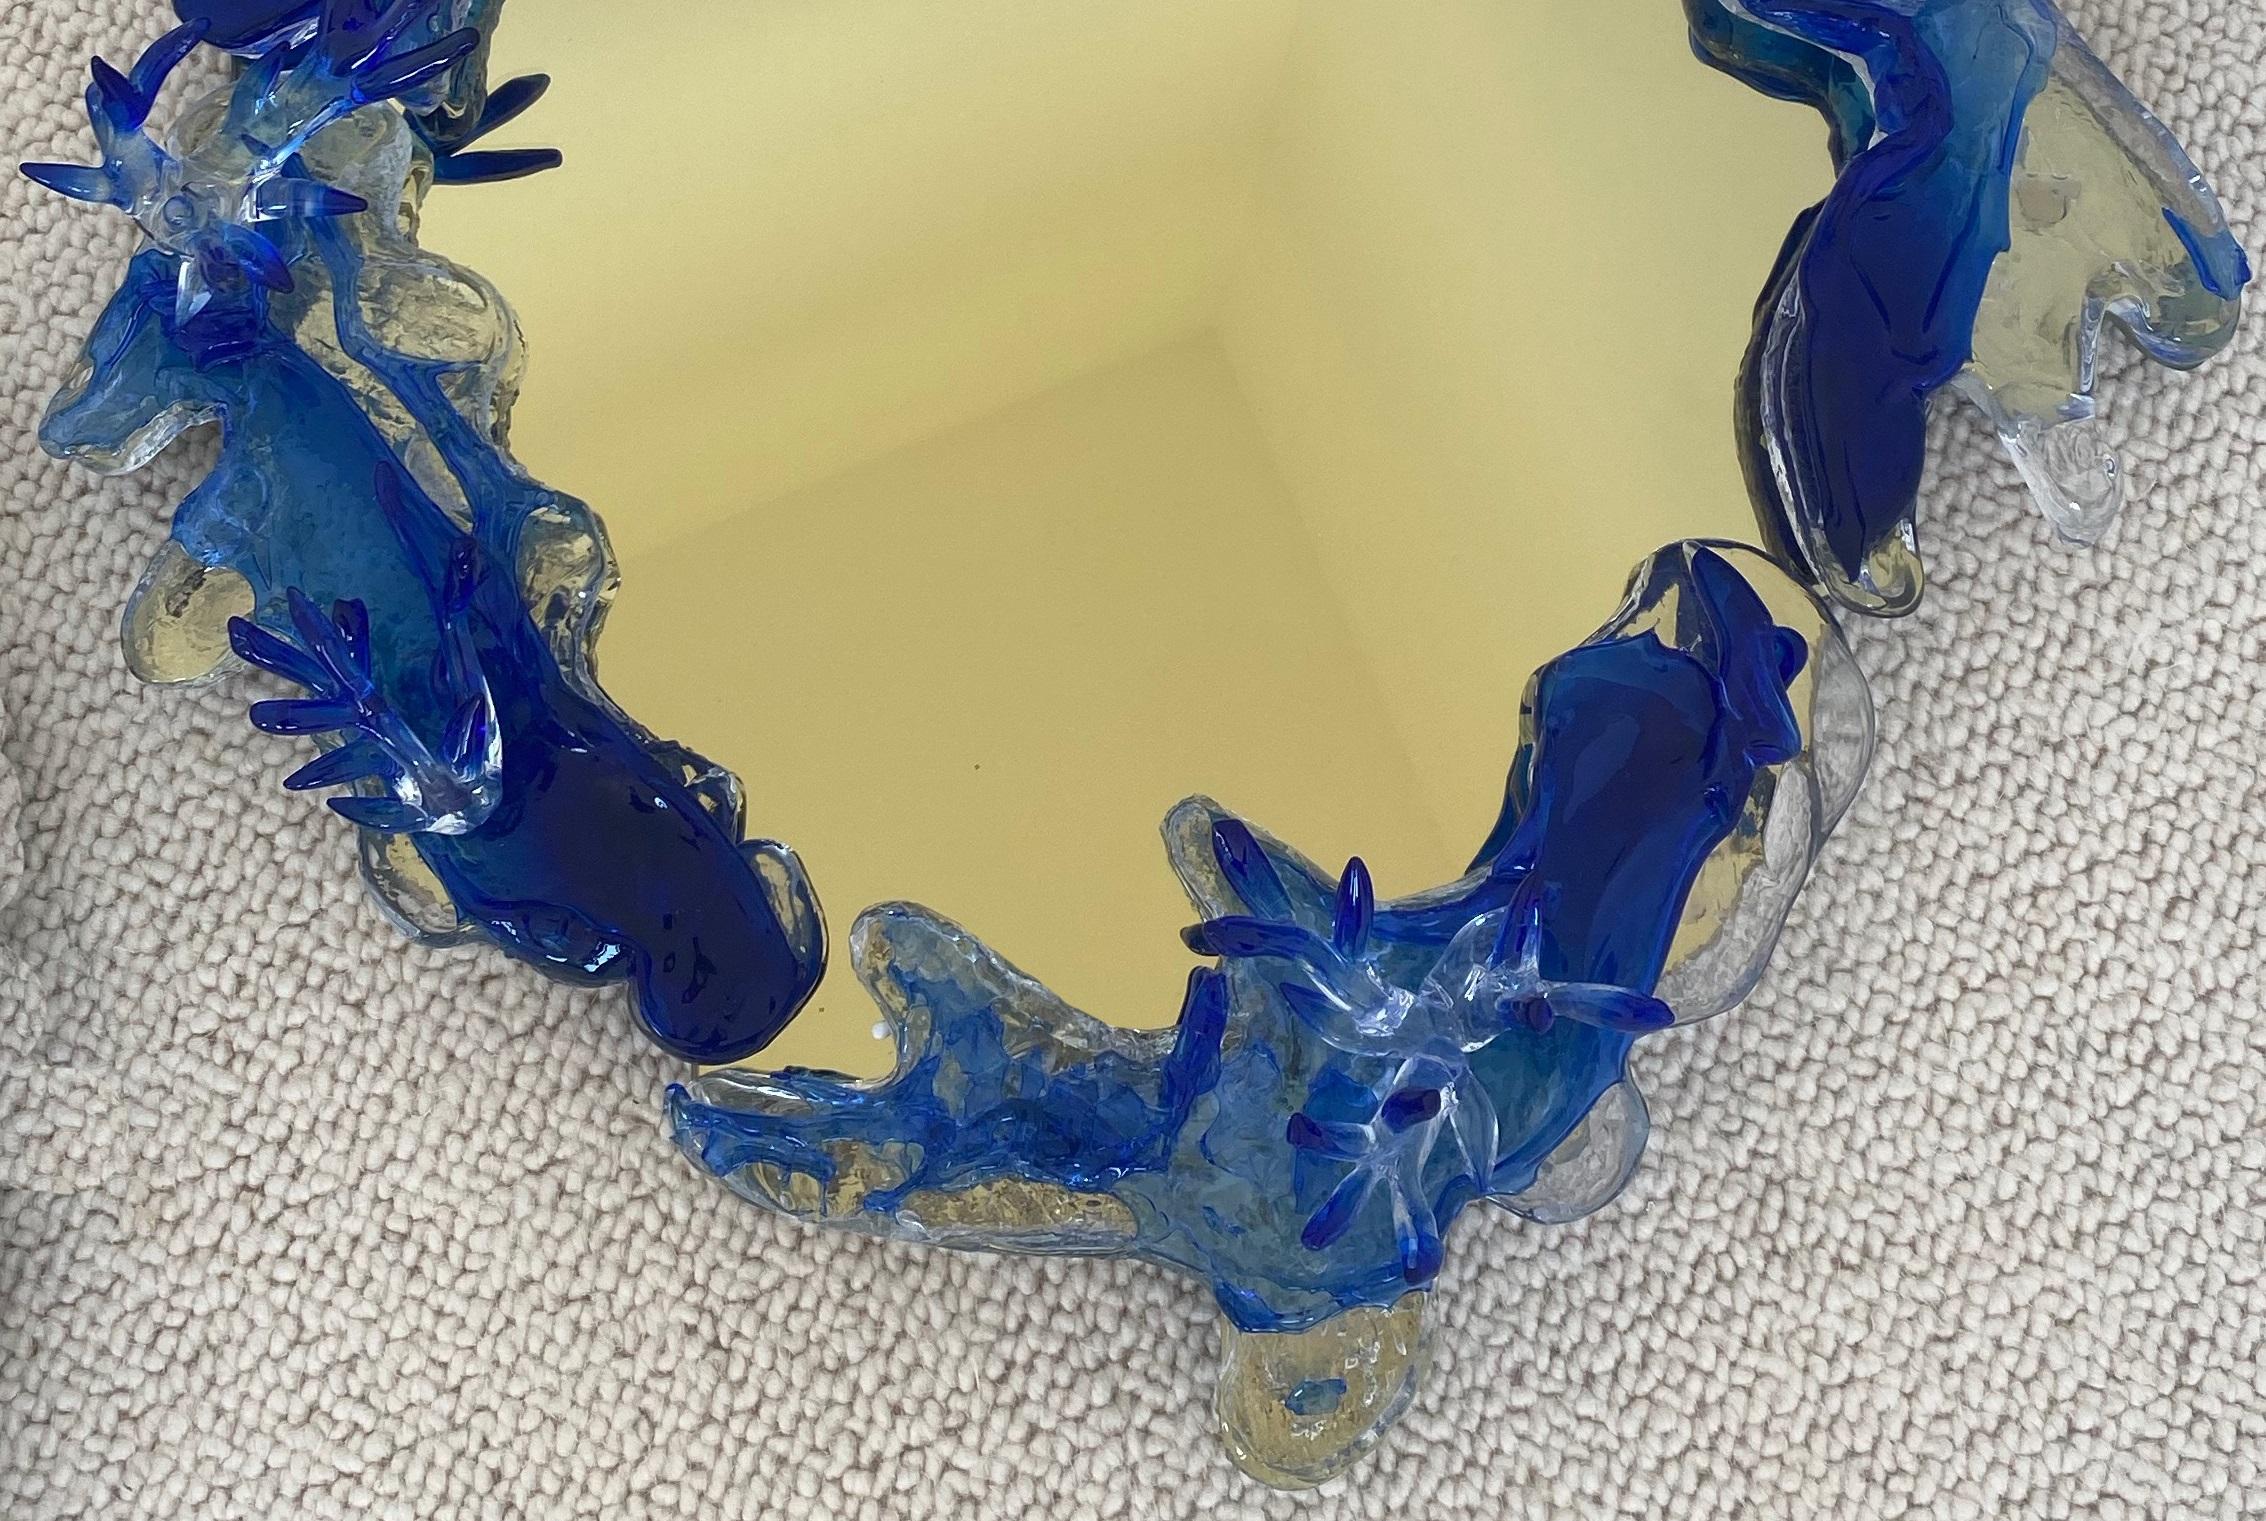 French Light Gold Mirror With Ultramarine Blue Decor by Emilie Lemardeley For Sale